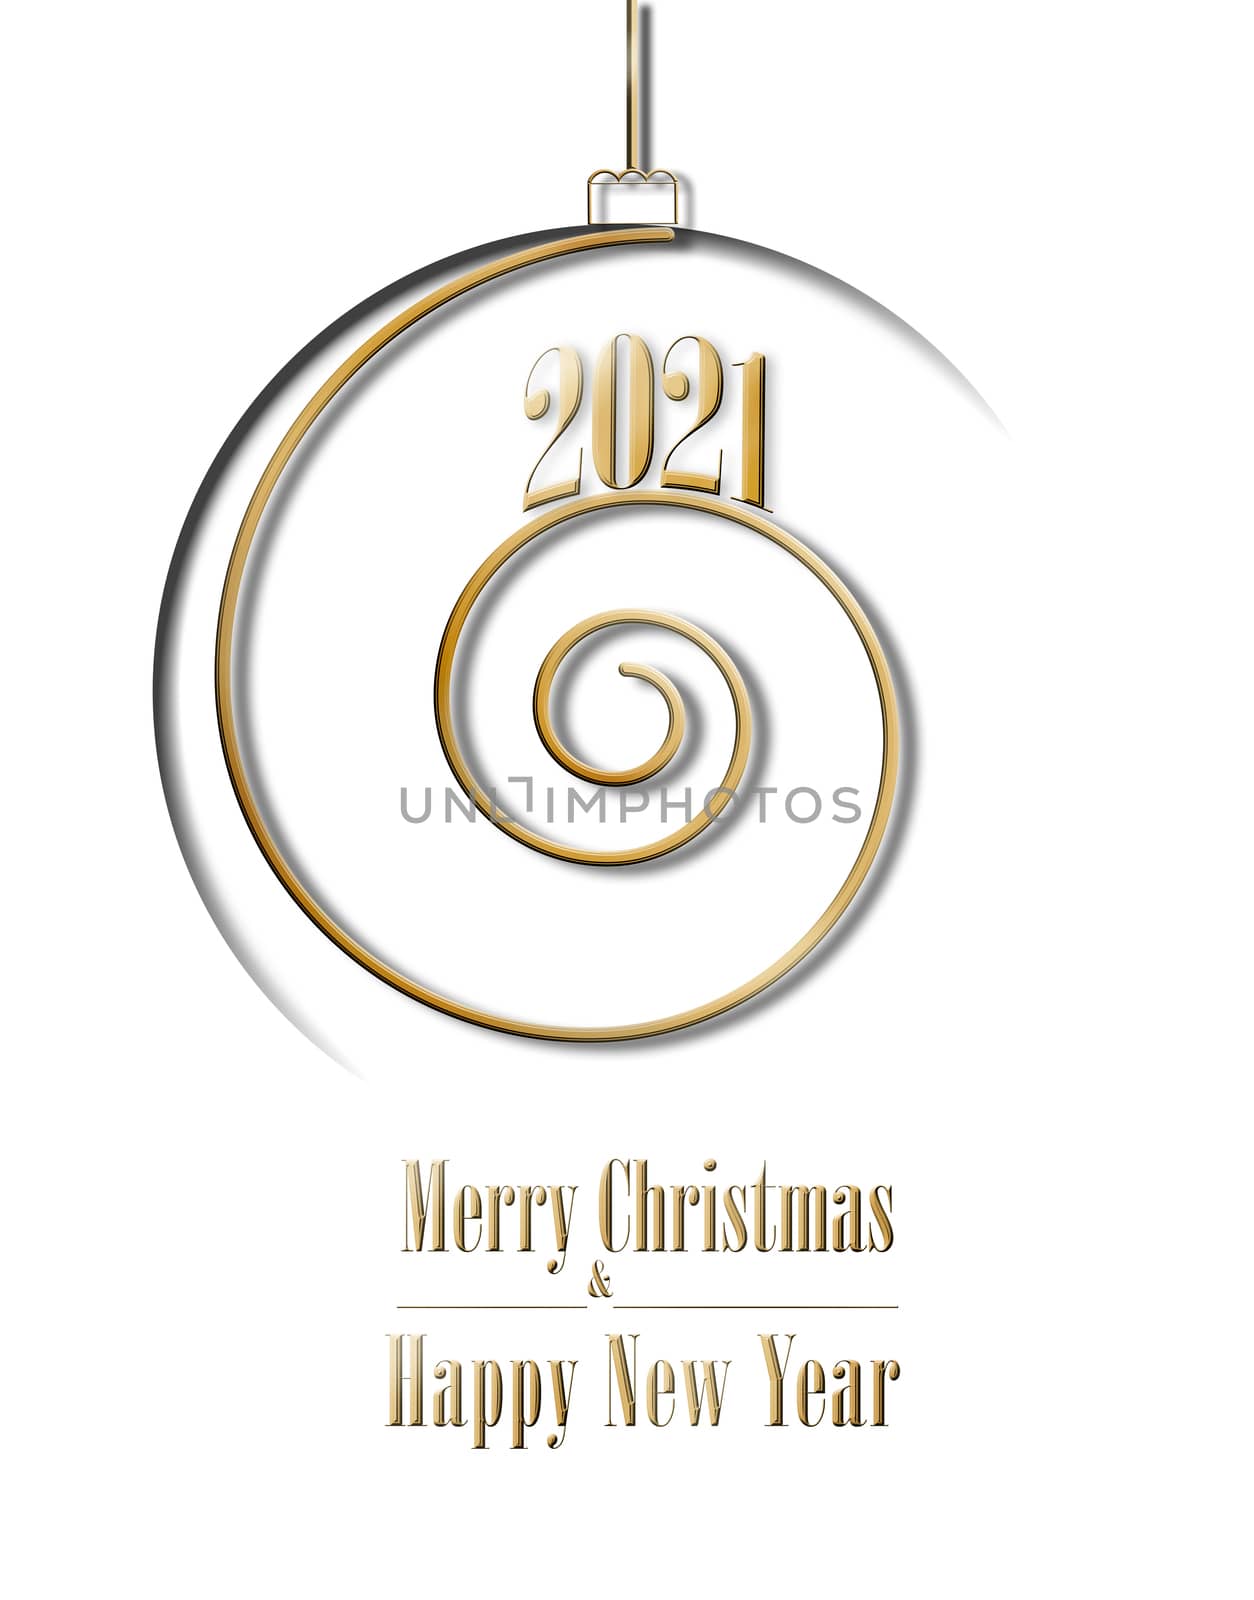 2021 Merry Christmas happy new year gold spiral shape on white background by NelliPolk